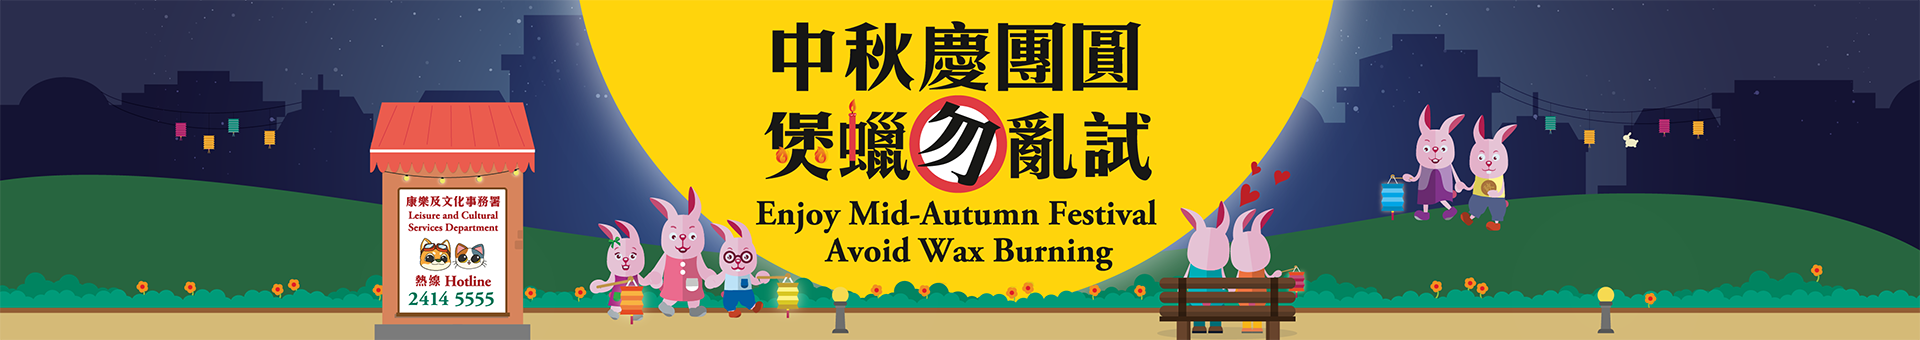 Public urged not to burn wax, fly sky lanterns or litter during Mid-Autumn Festival